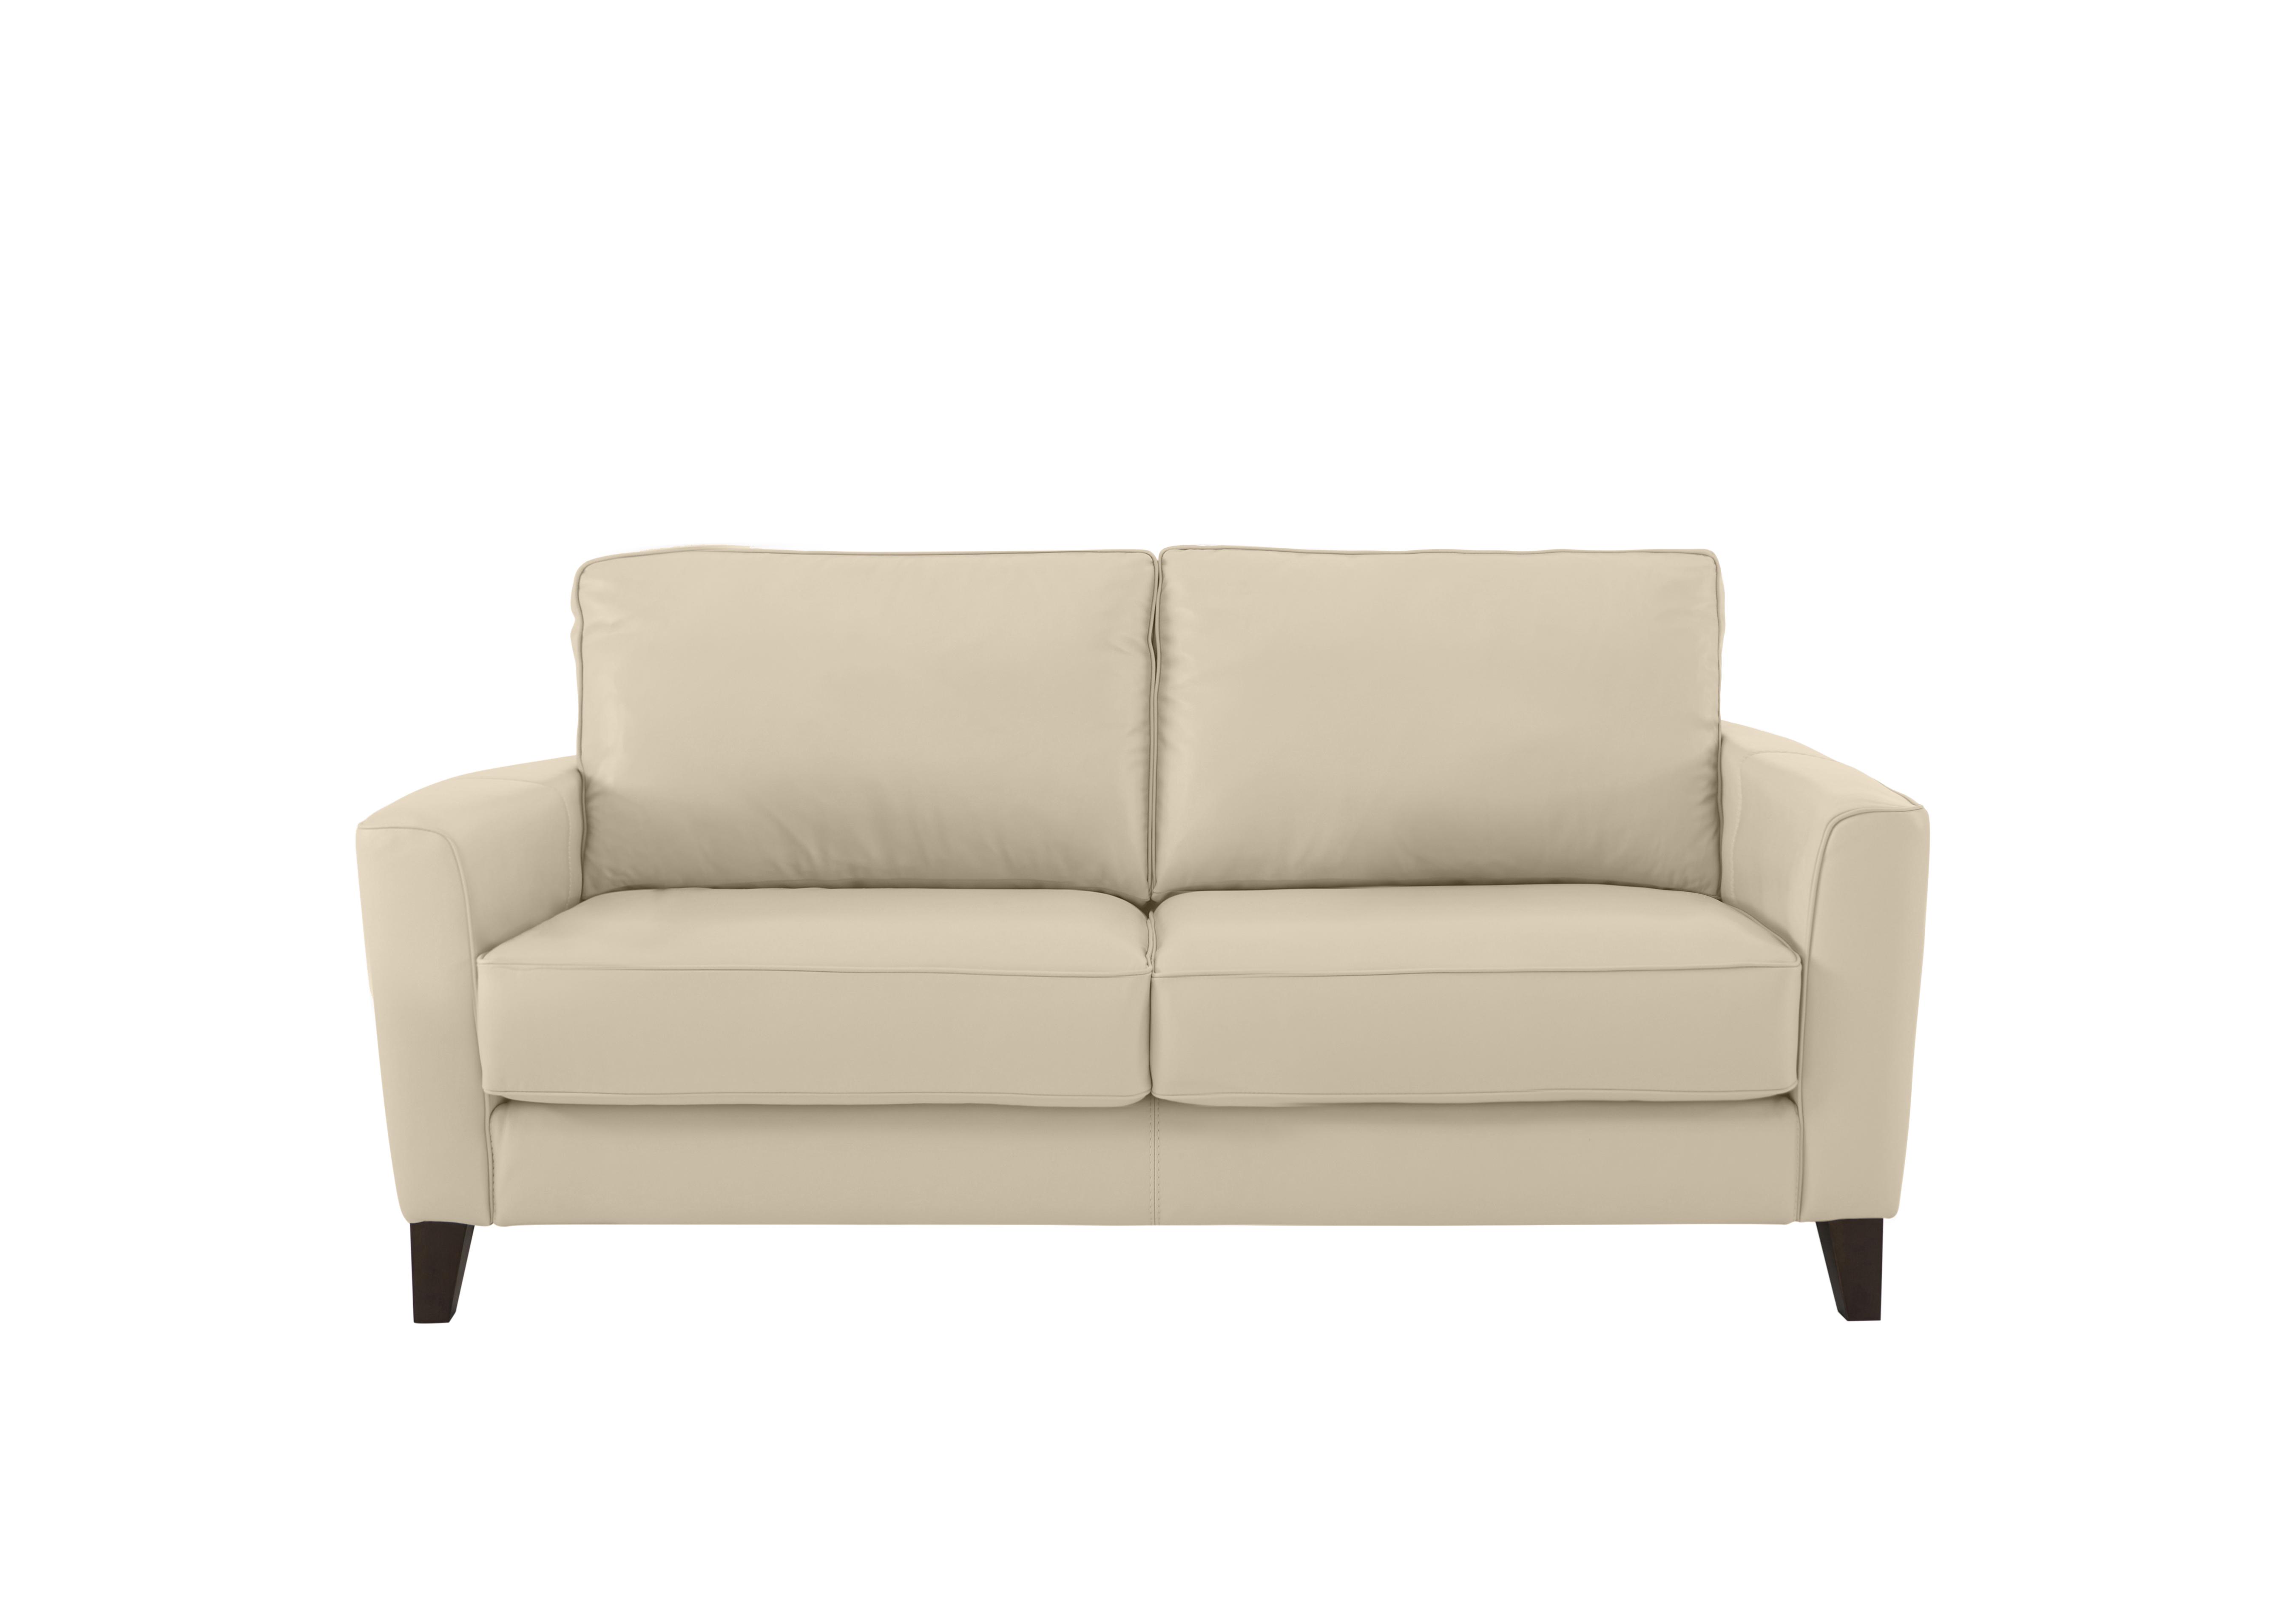 Brondby 2 Seater Leather Sofa in Bv-862c Bisque on Furniture Village